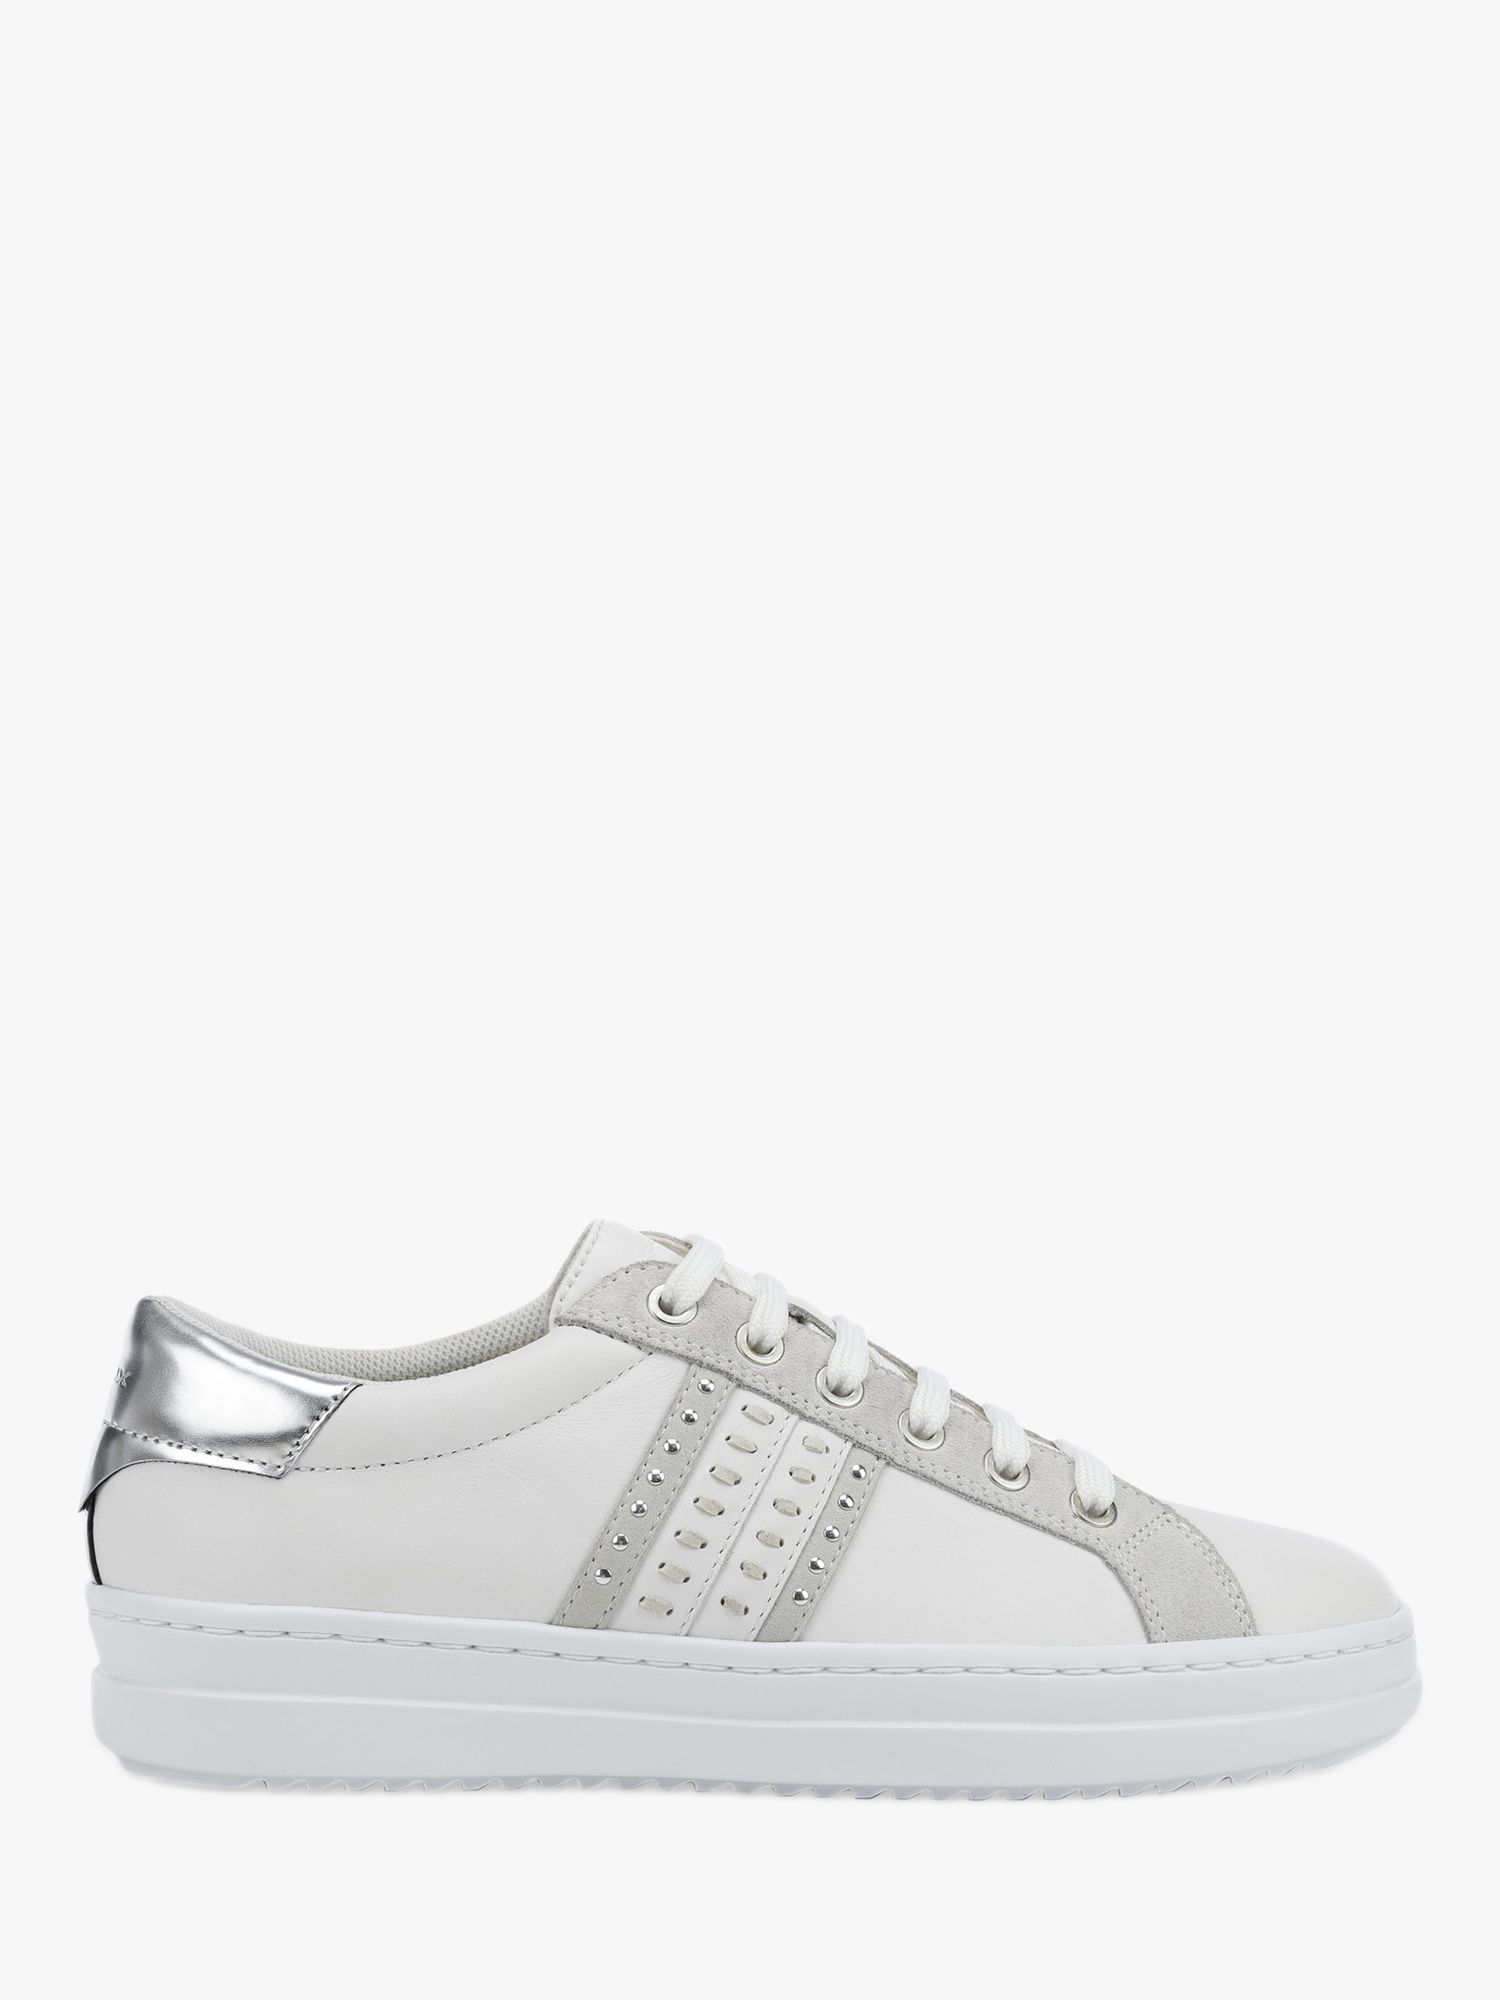 Geox Women's Pontoise Stud Trainers, White/Silver at John Lewis & Partners